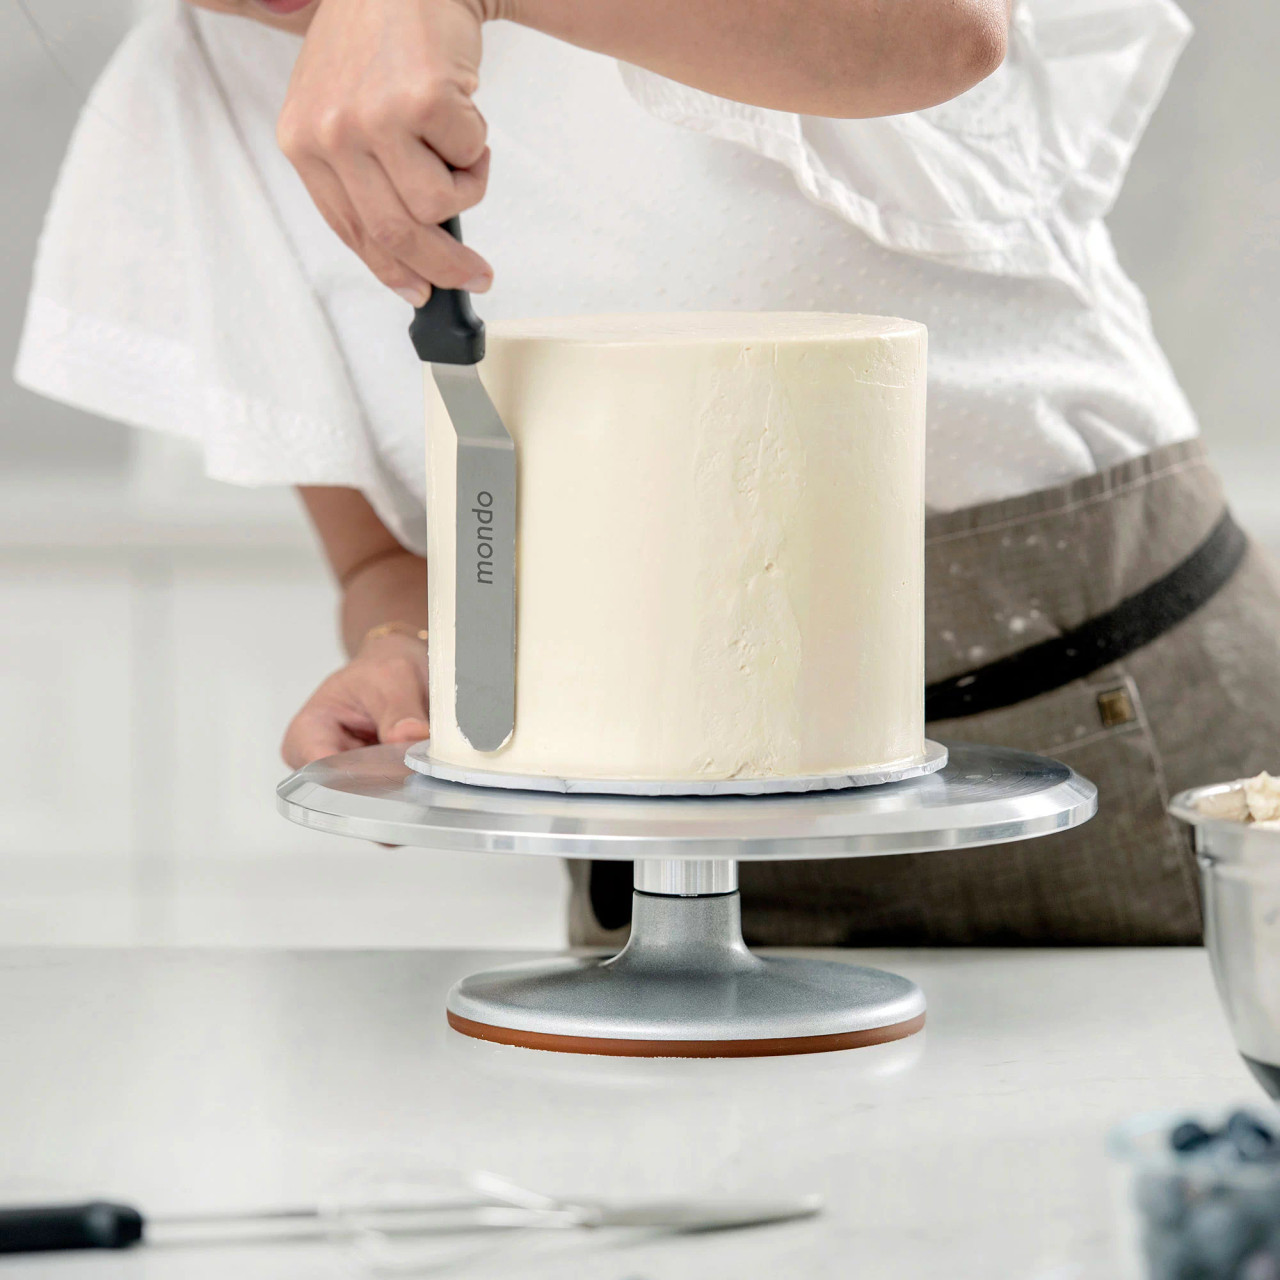 Mondo Professional Cake Decorating Turntable & Stand - Padstow Food Service  Distributors